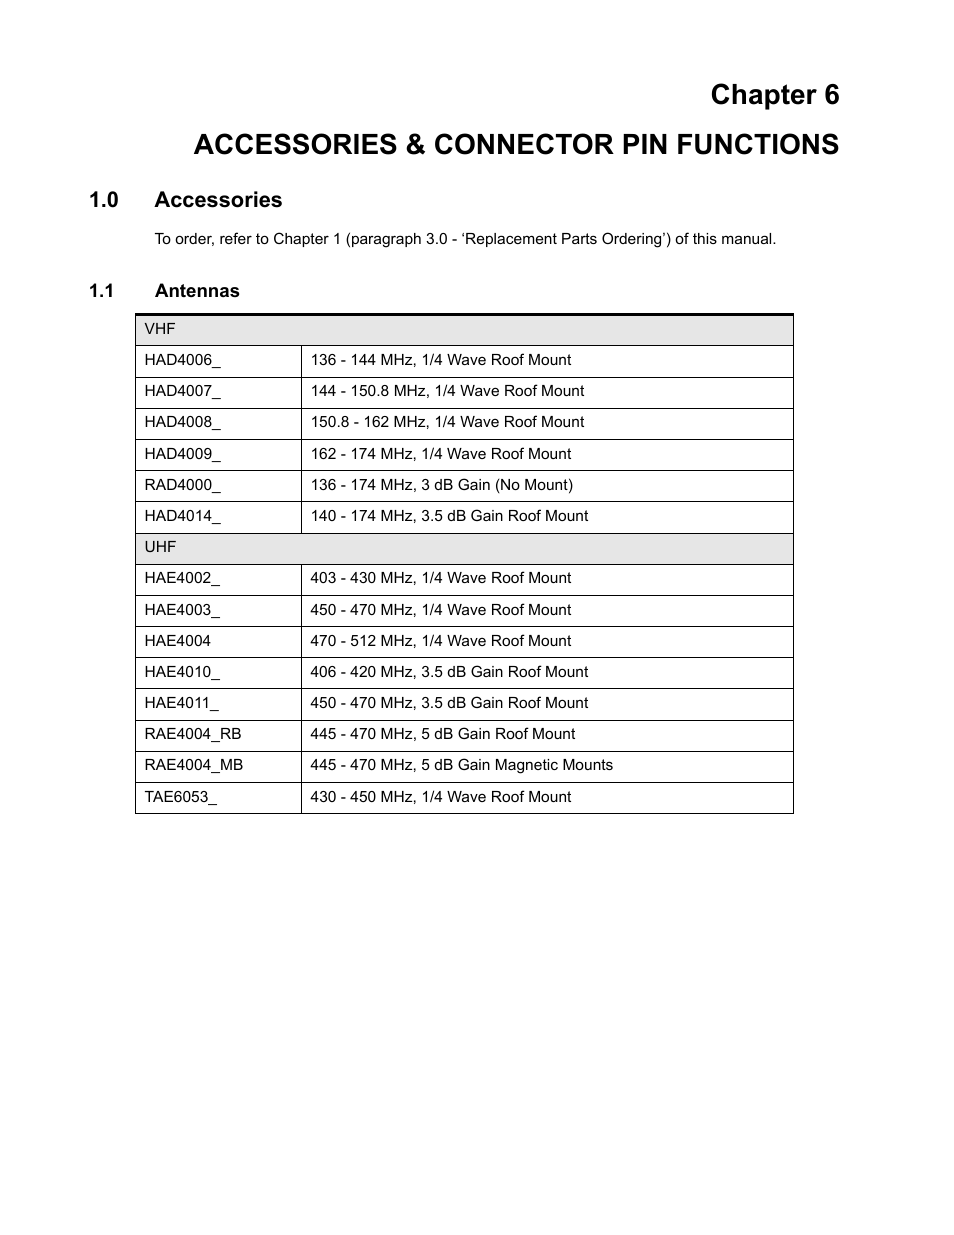 Chapter 6 accessories, 0 accessories, 1 antennas | Chapter 6 accessories & connector pin functions | Nikon RADIUS CM200 User Manual | Page 49 / 70